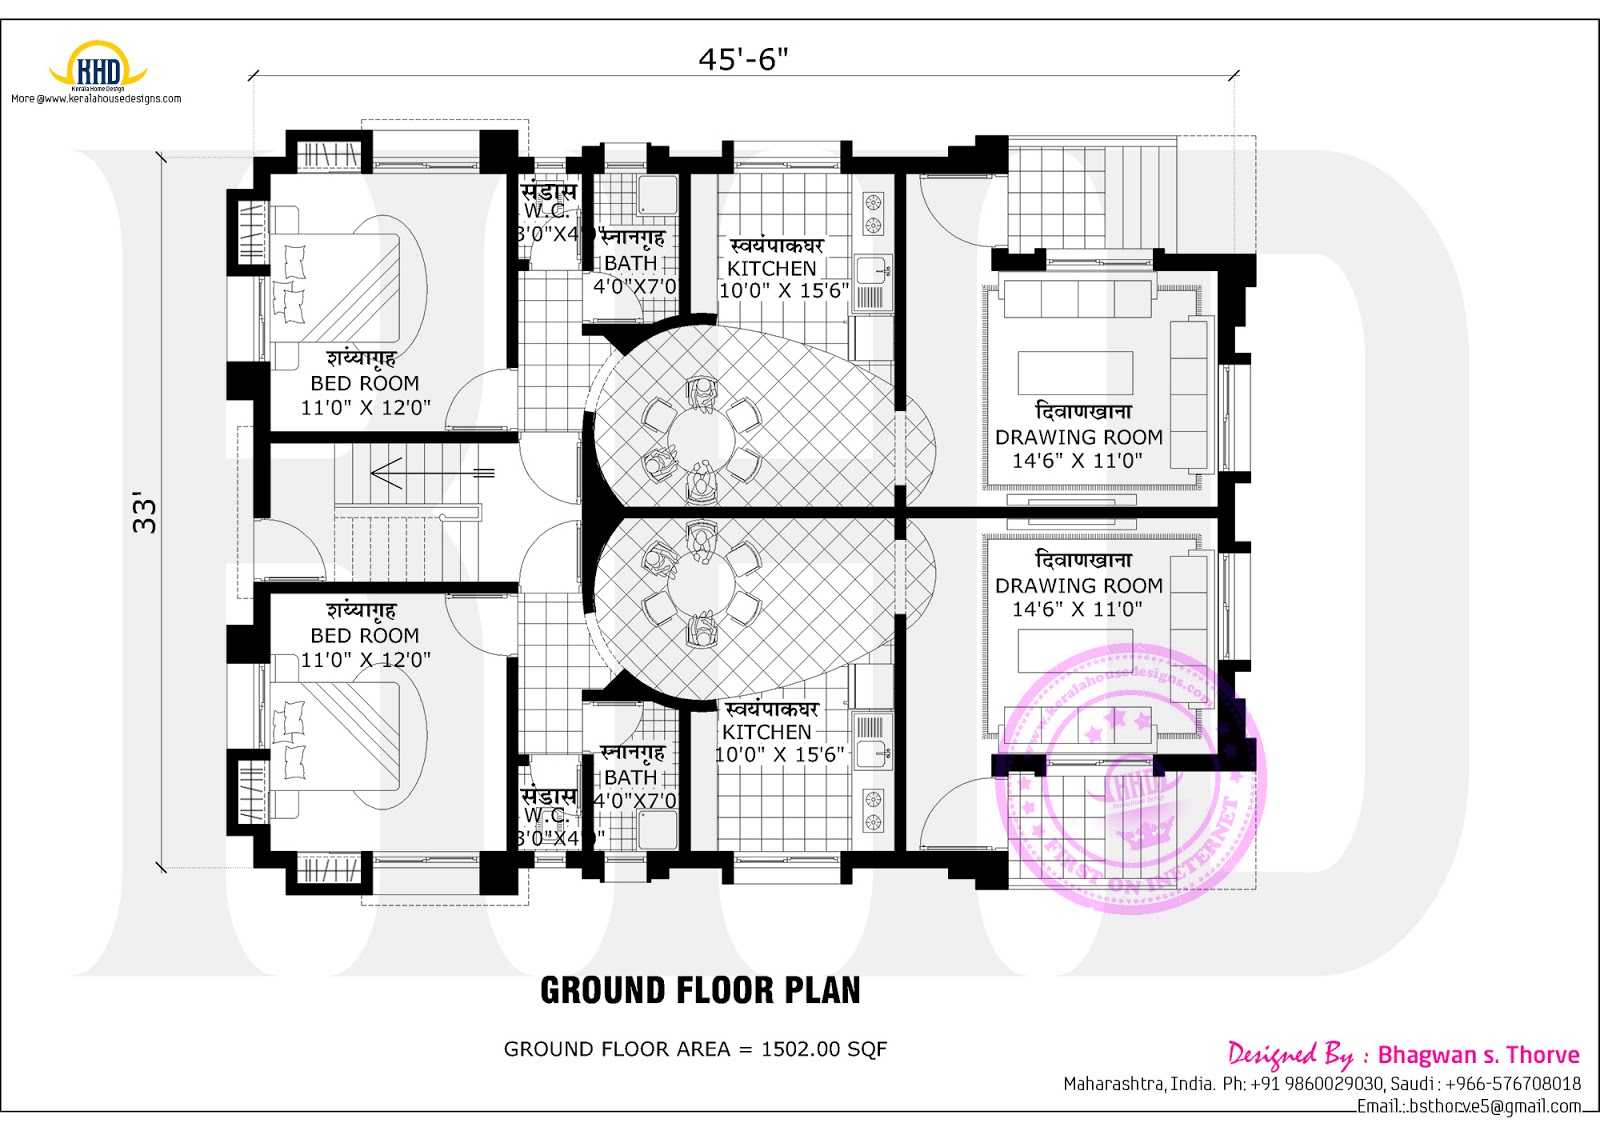  2  bedroom  Indian  home  design  with plan  Kerala home  